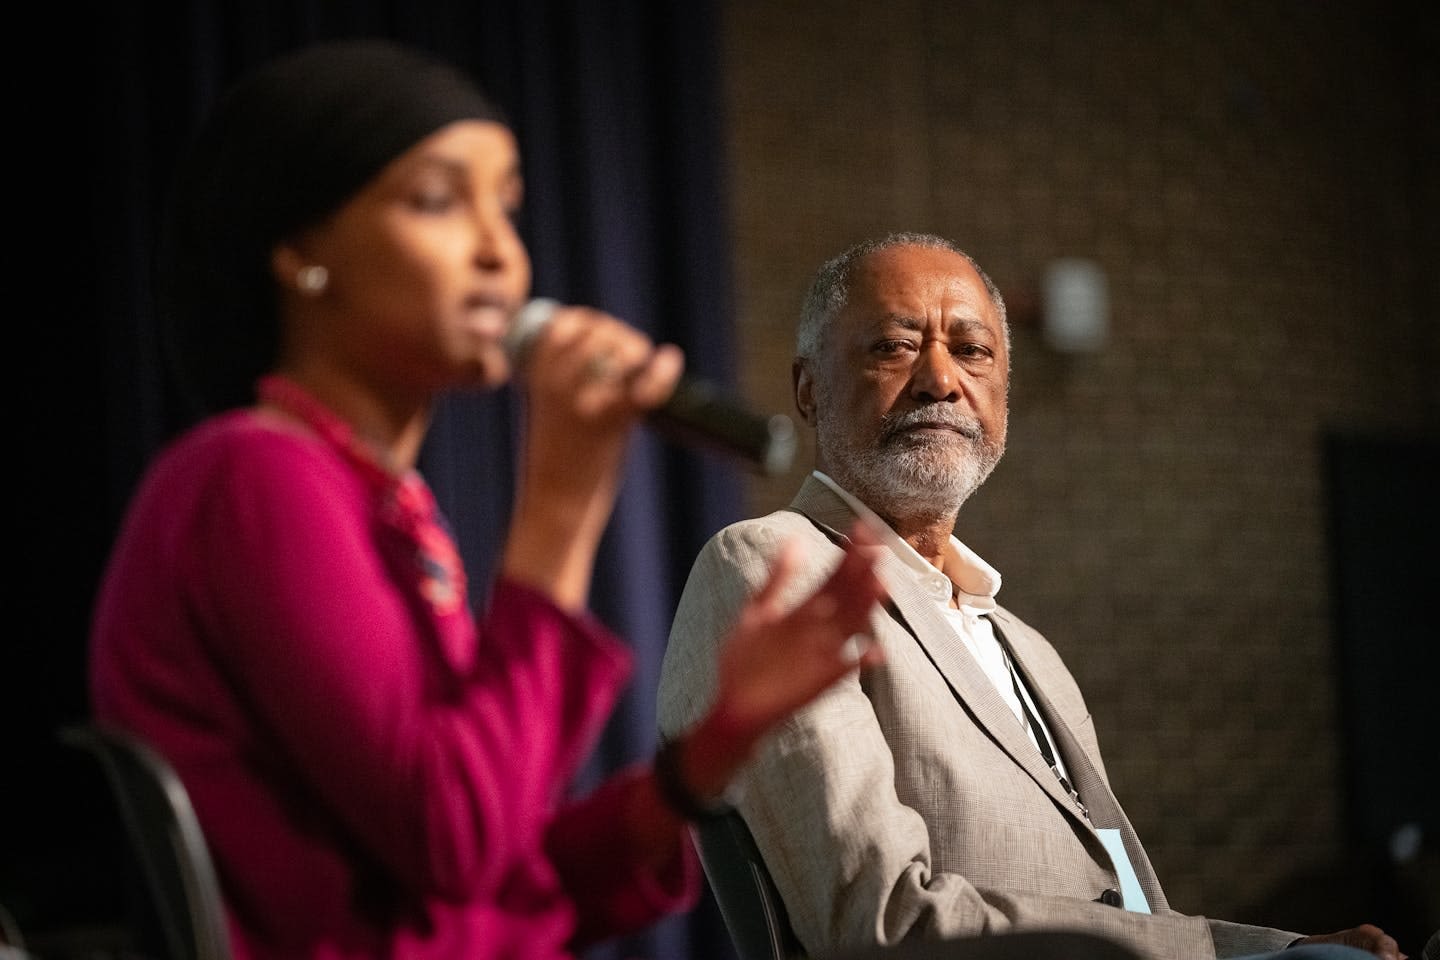 Pro-Israel groups stay out of Ilhan Omar, Don Samuels rematch so far